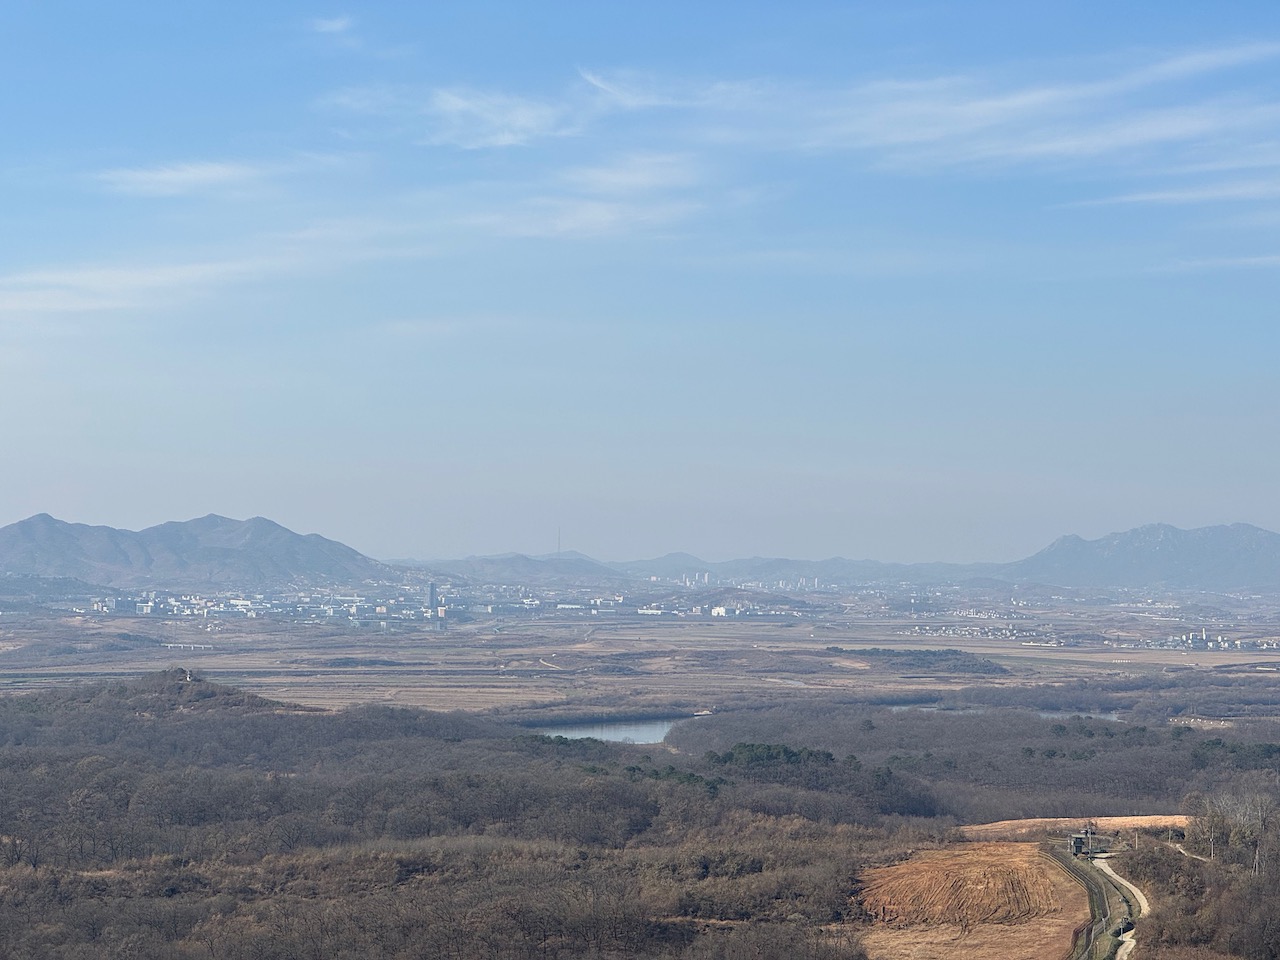 North Korea, with Gaeseong city in the background